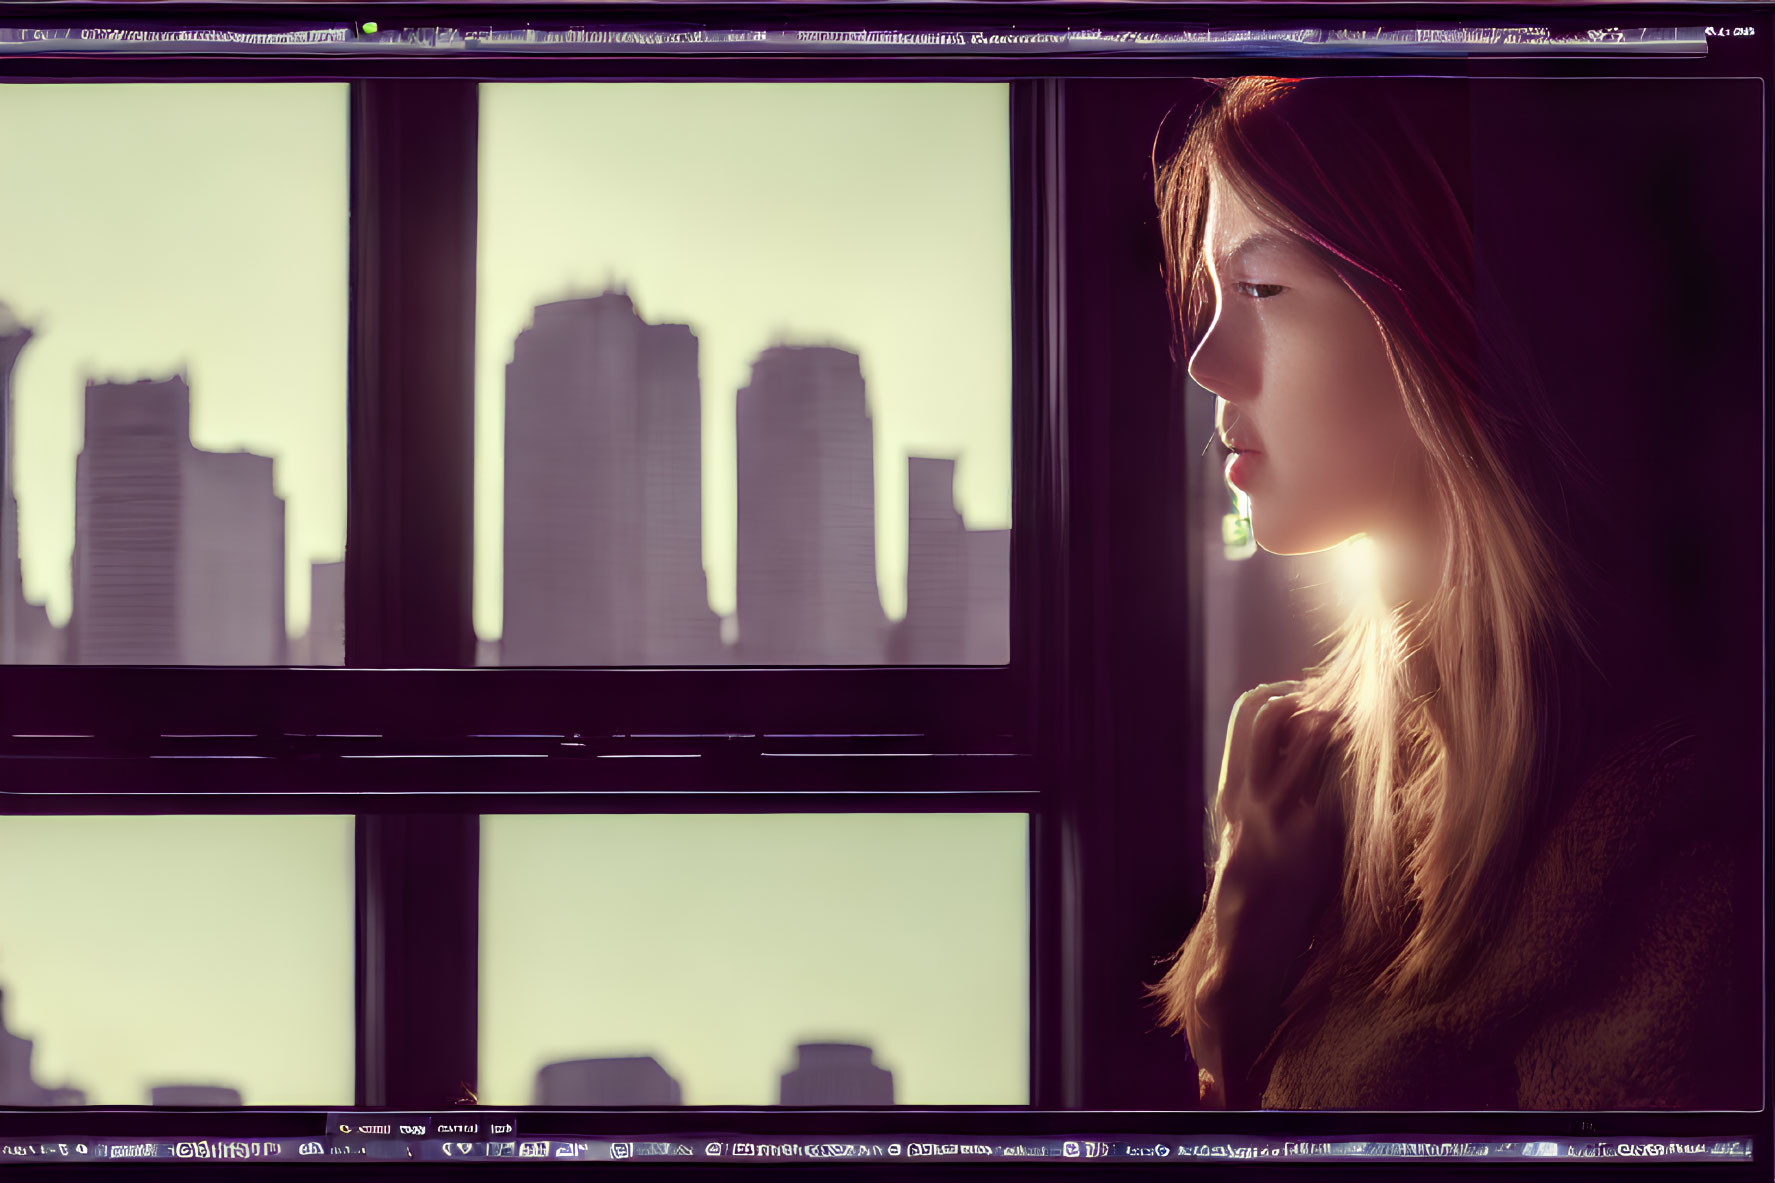 Silhouetted woman looking out window at city skyline during sunset